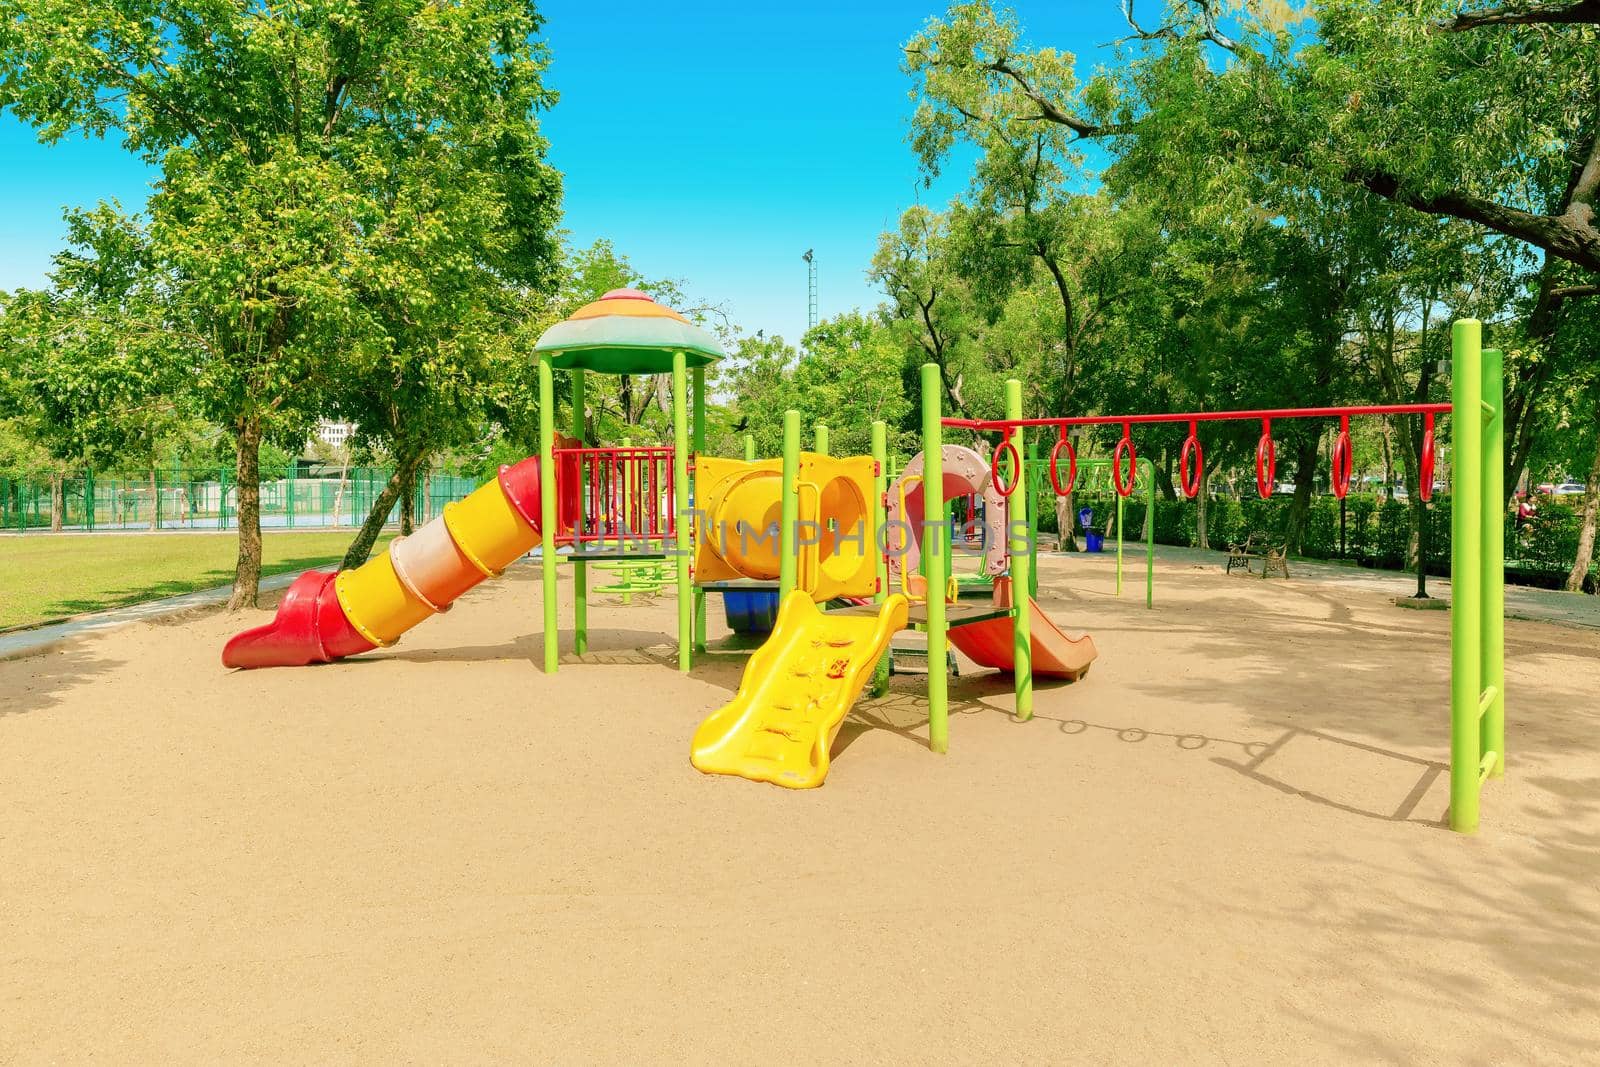 Colorful children playground activities in public park surrounded by green trees